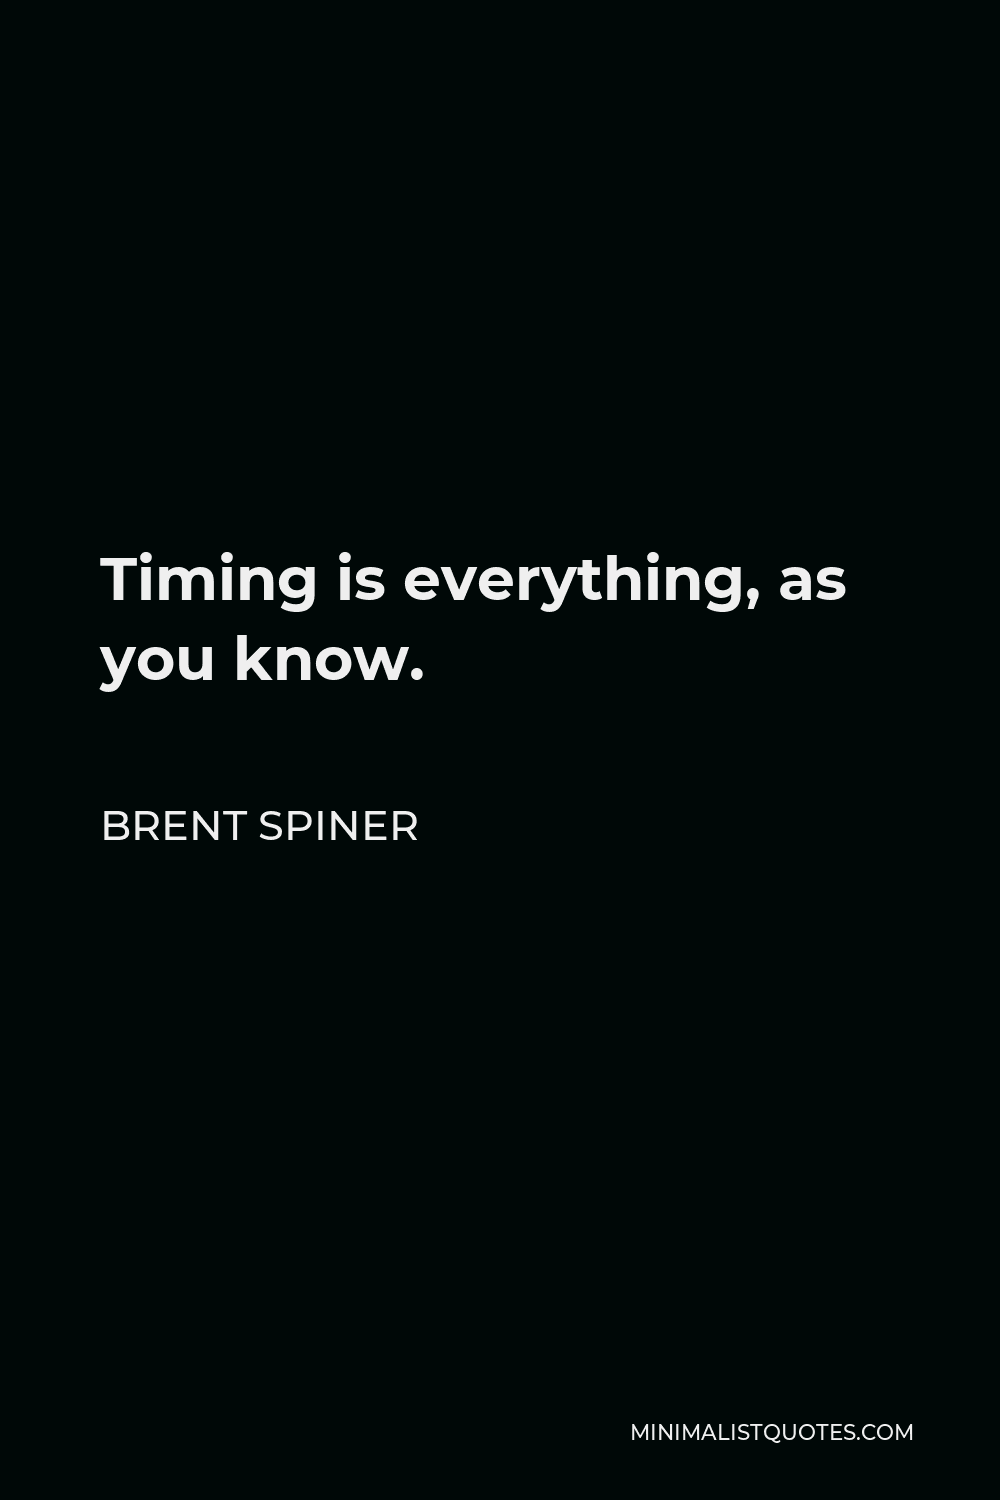 Brent Spiner Quote - Timing is everything, as you know.